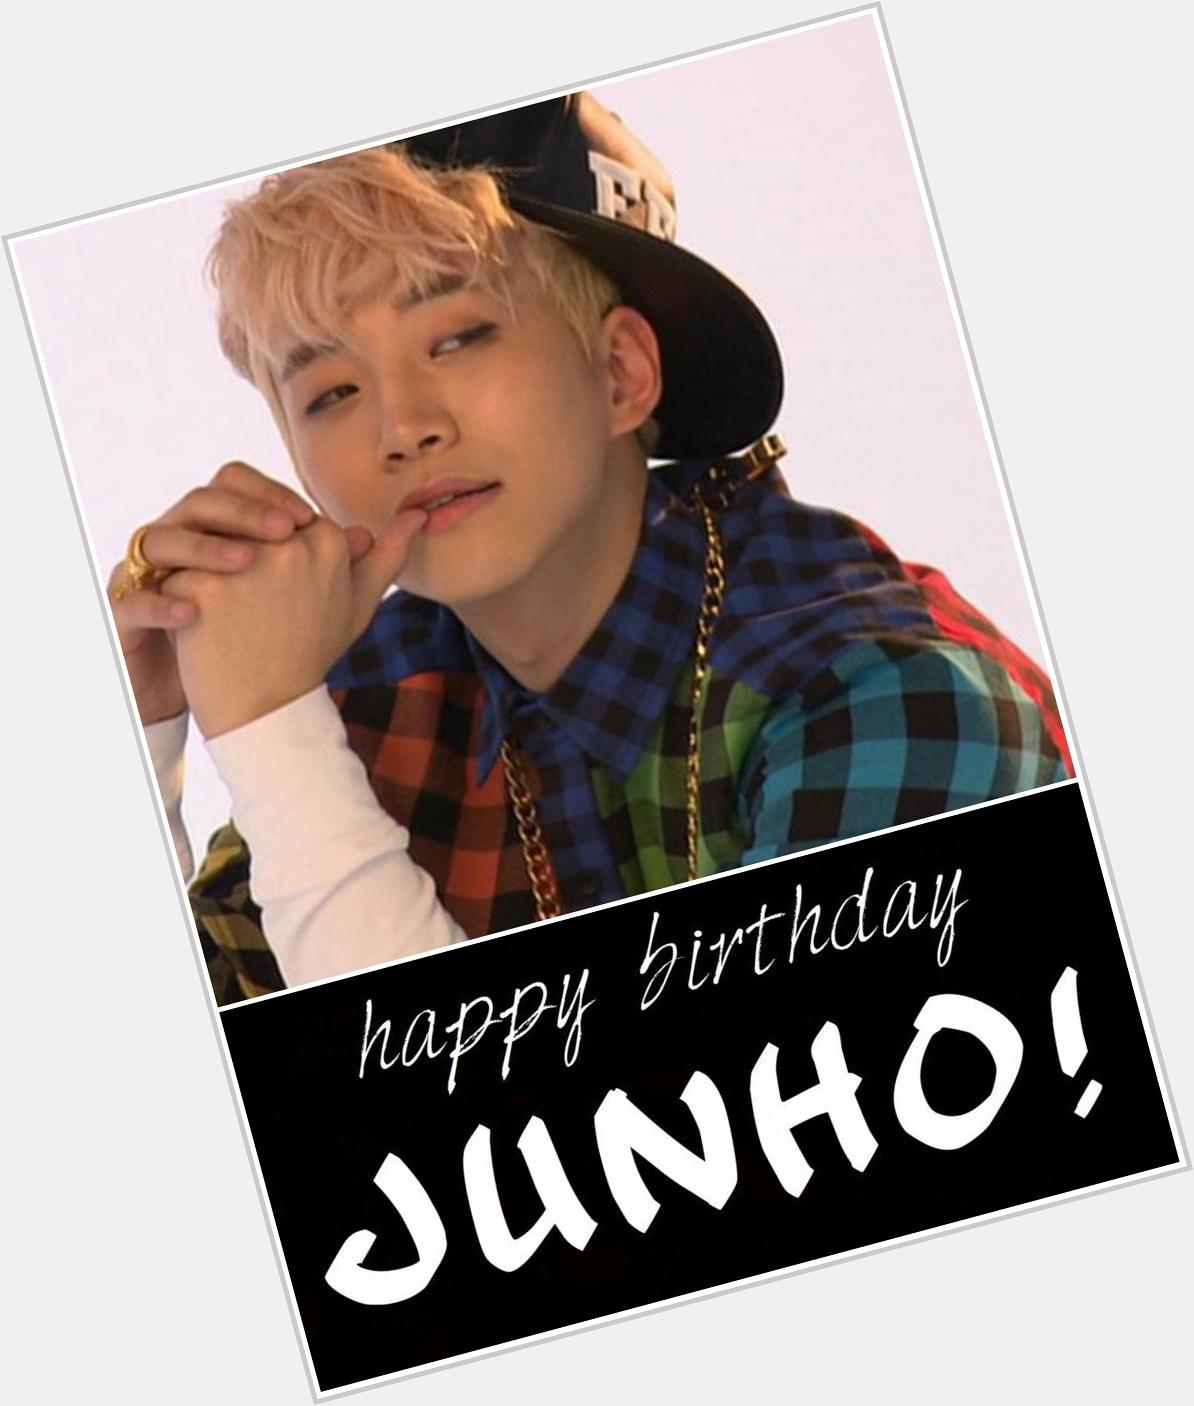 Happy birthday to 2PM\s falsetto king...LEE JUNHO!!! More power and success hyung!  